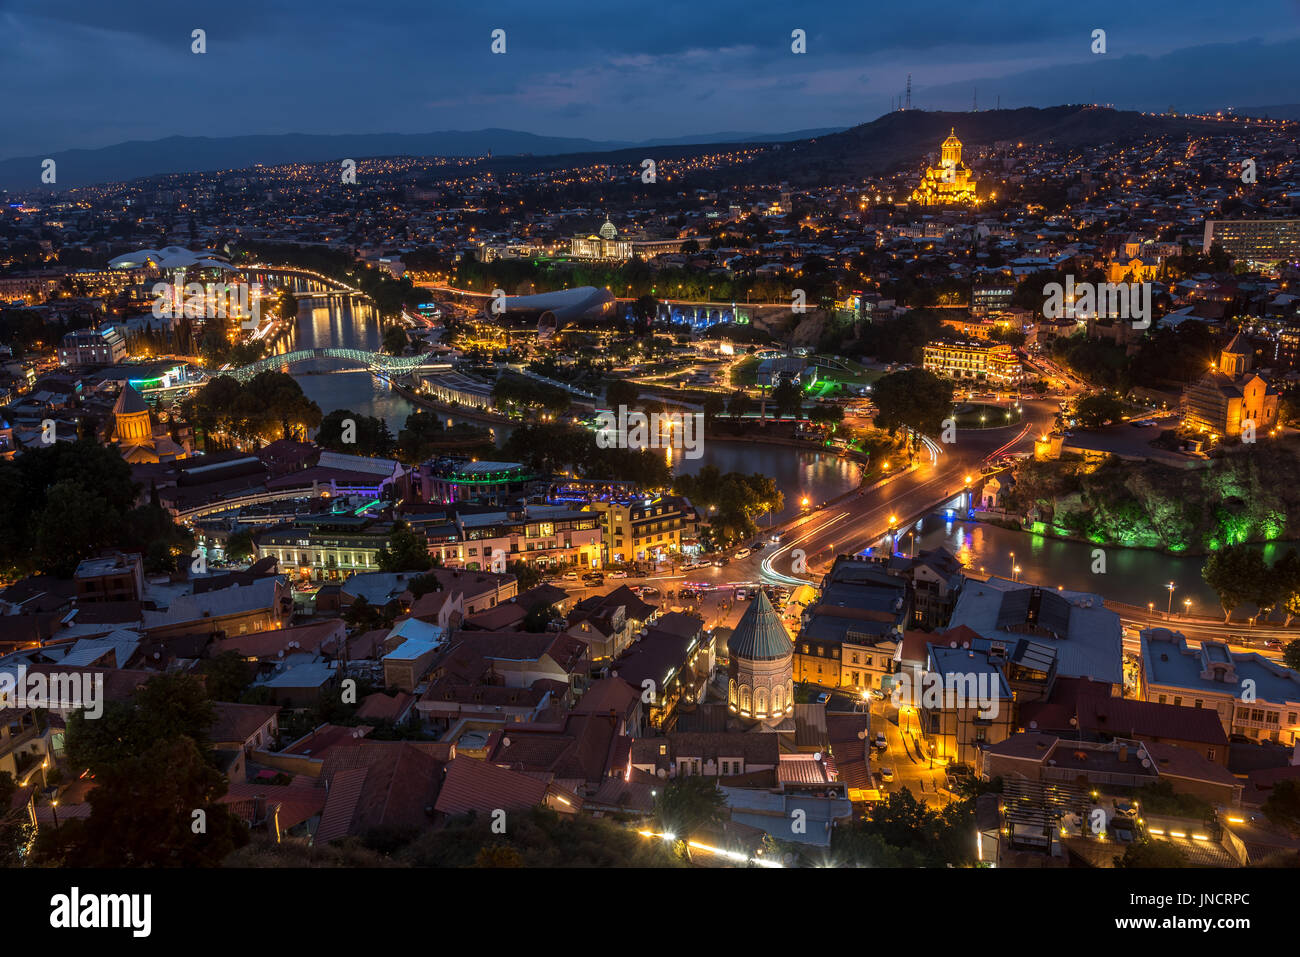 Night view of Tbilisi, the capital of Georgia with old town and modern architecture. Stock Photo